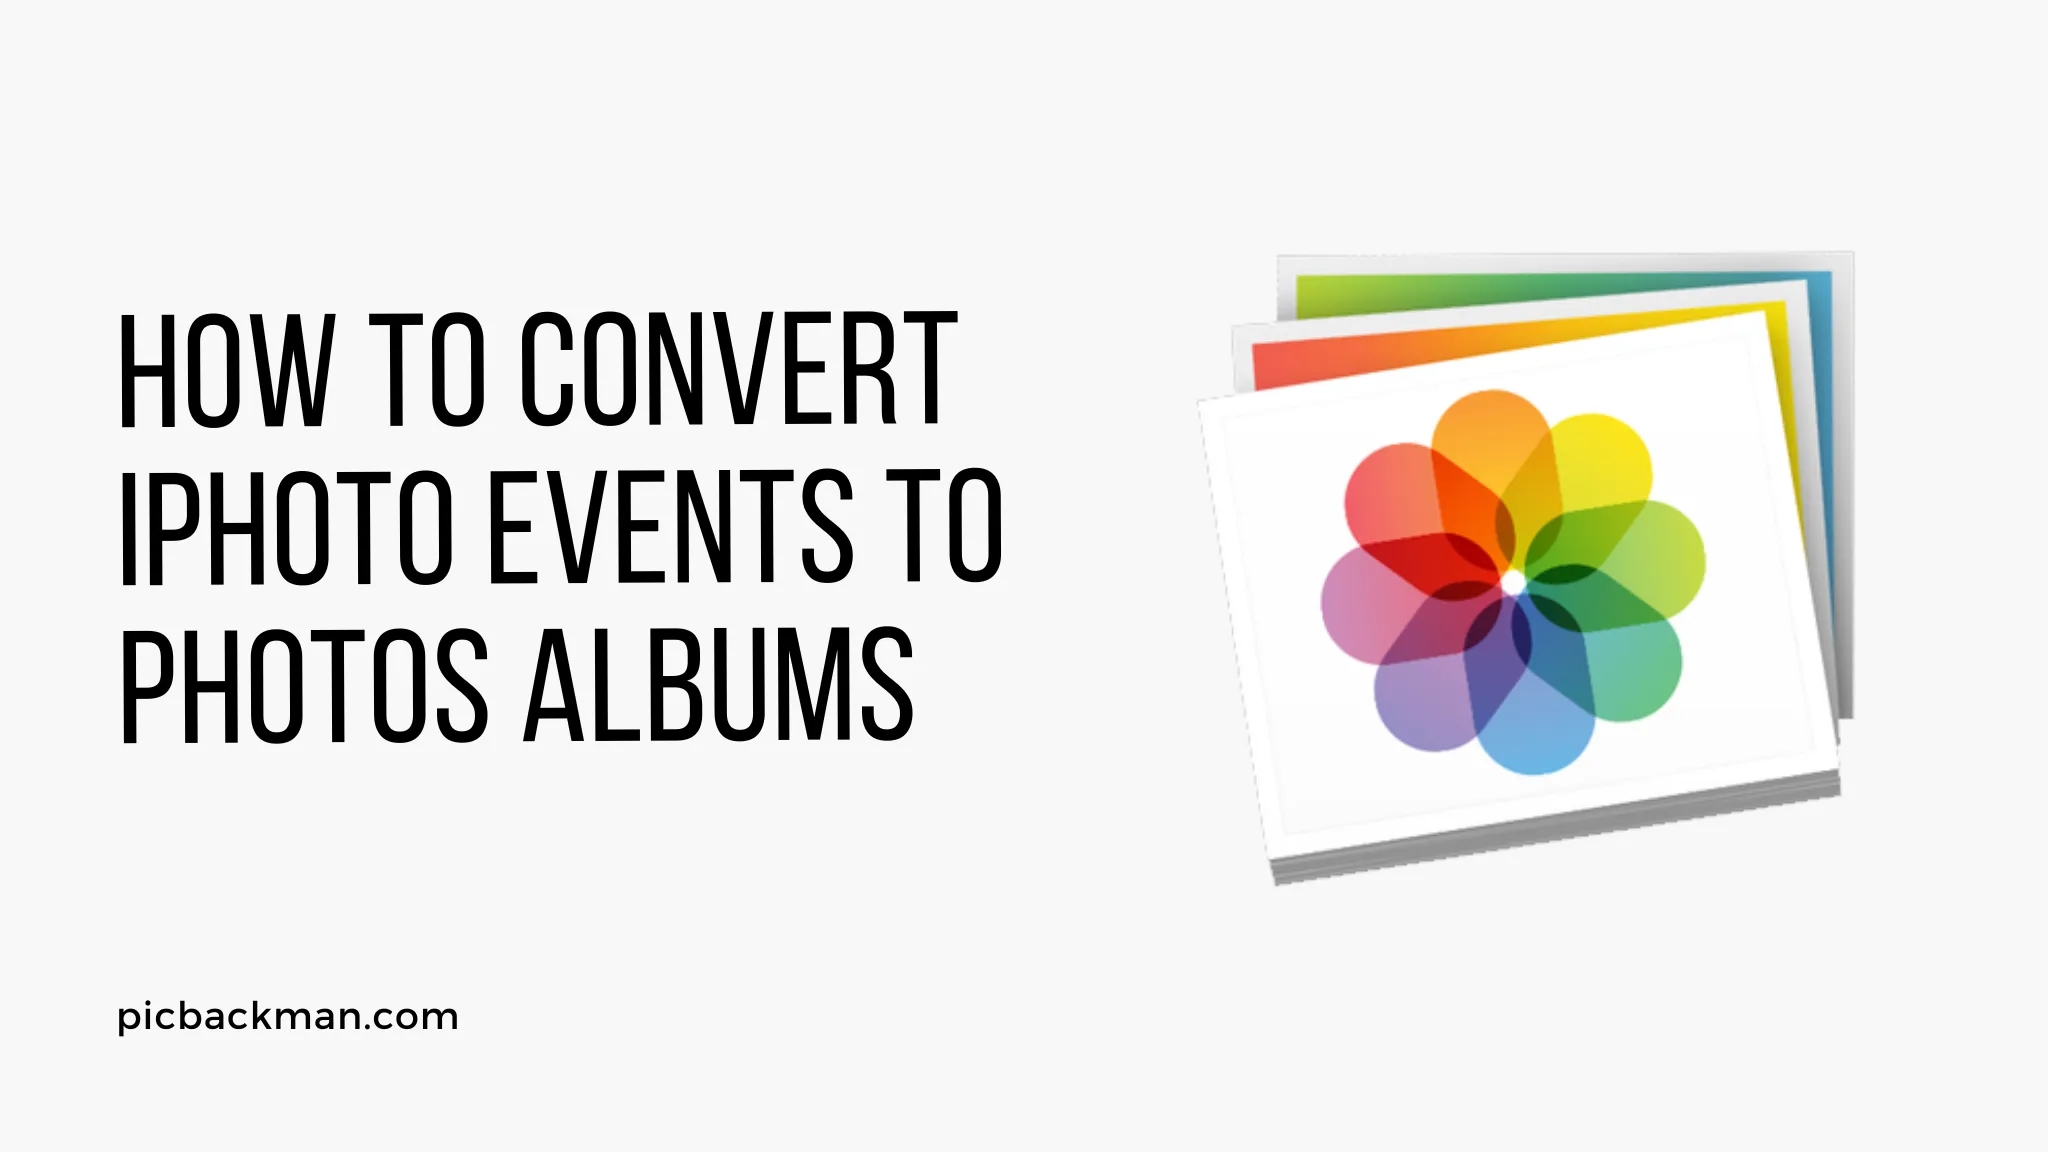 How to Convert iPhoto Events to Photos Albums?